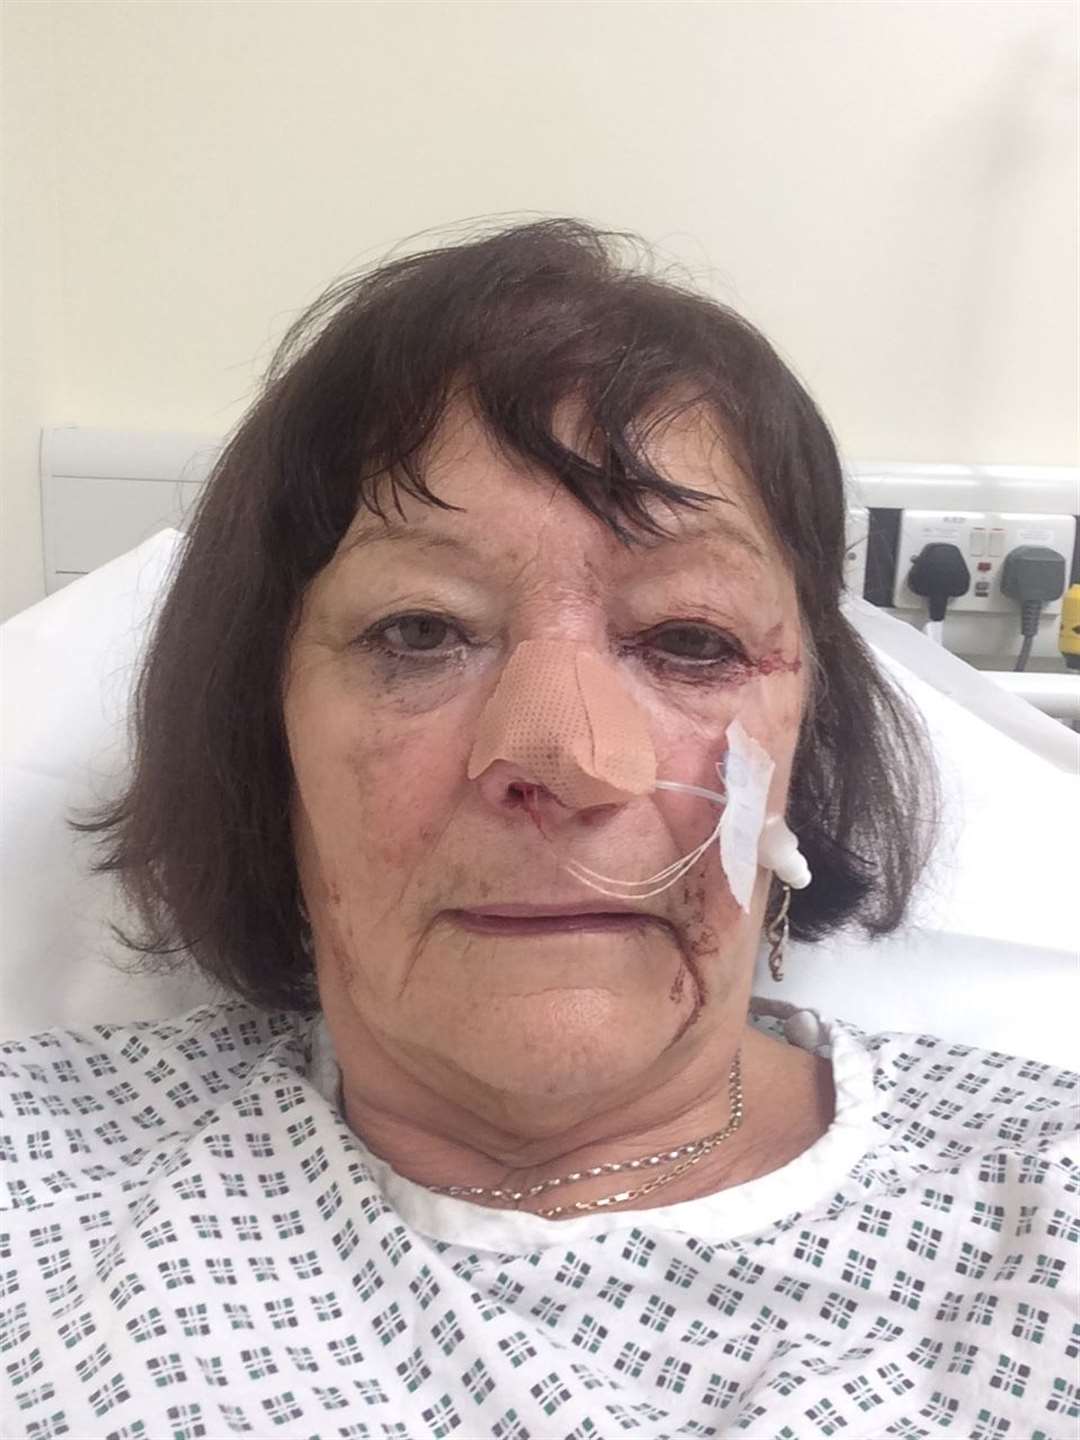 Joyce Green in hospital with a severe nose bleed